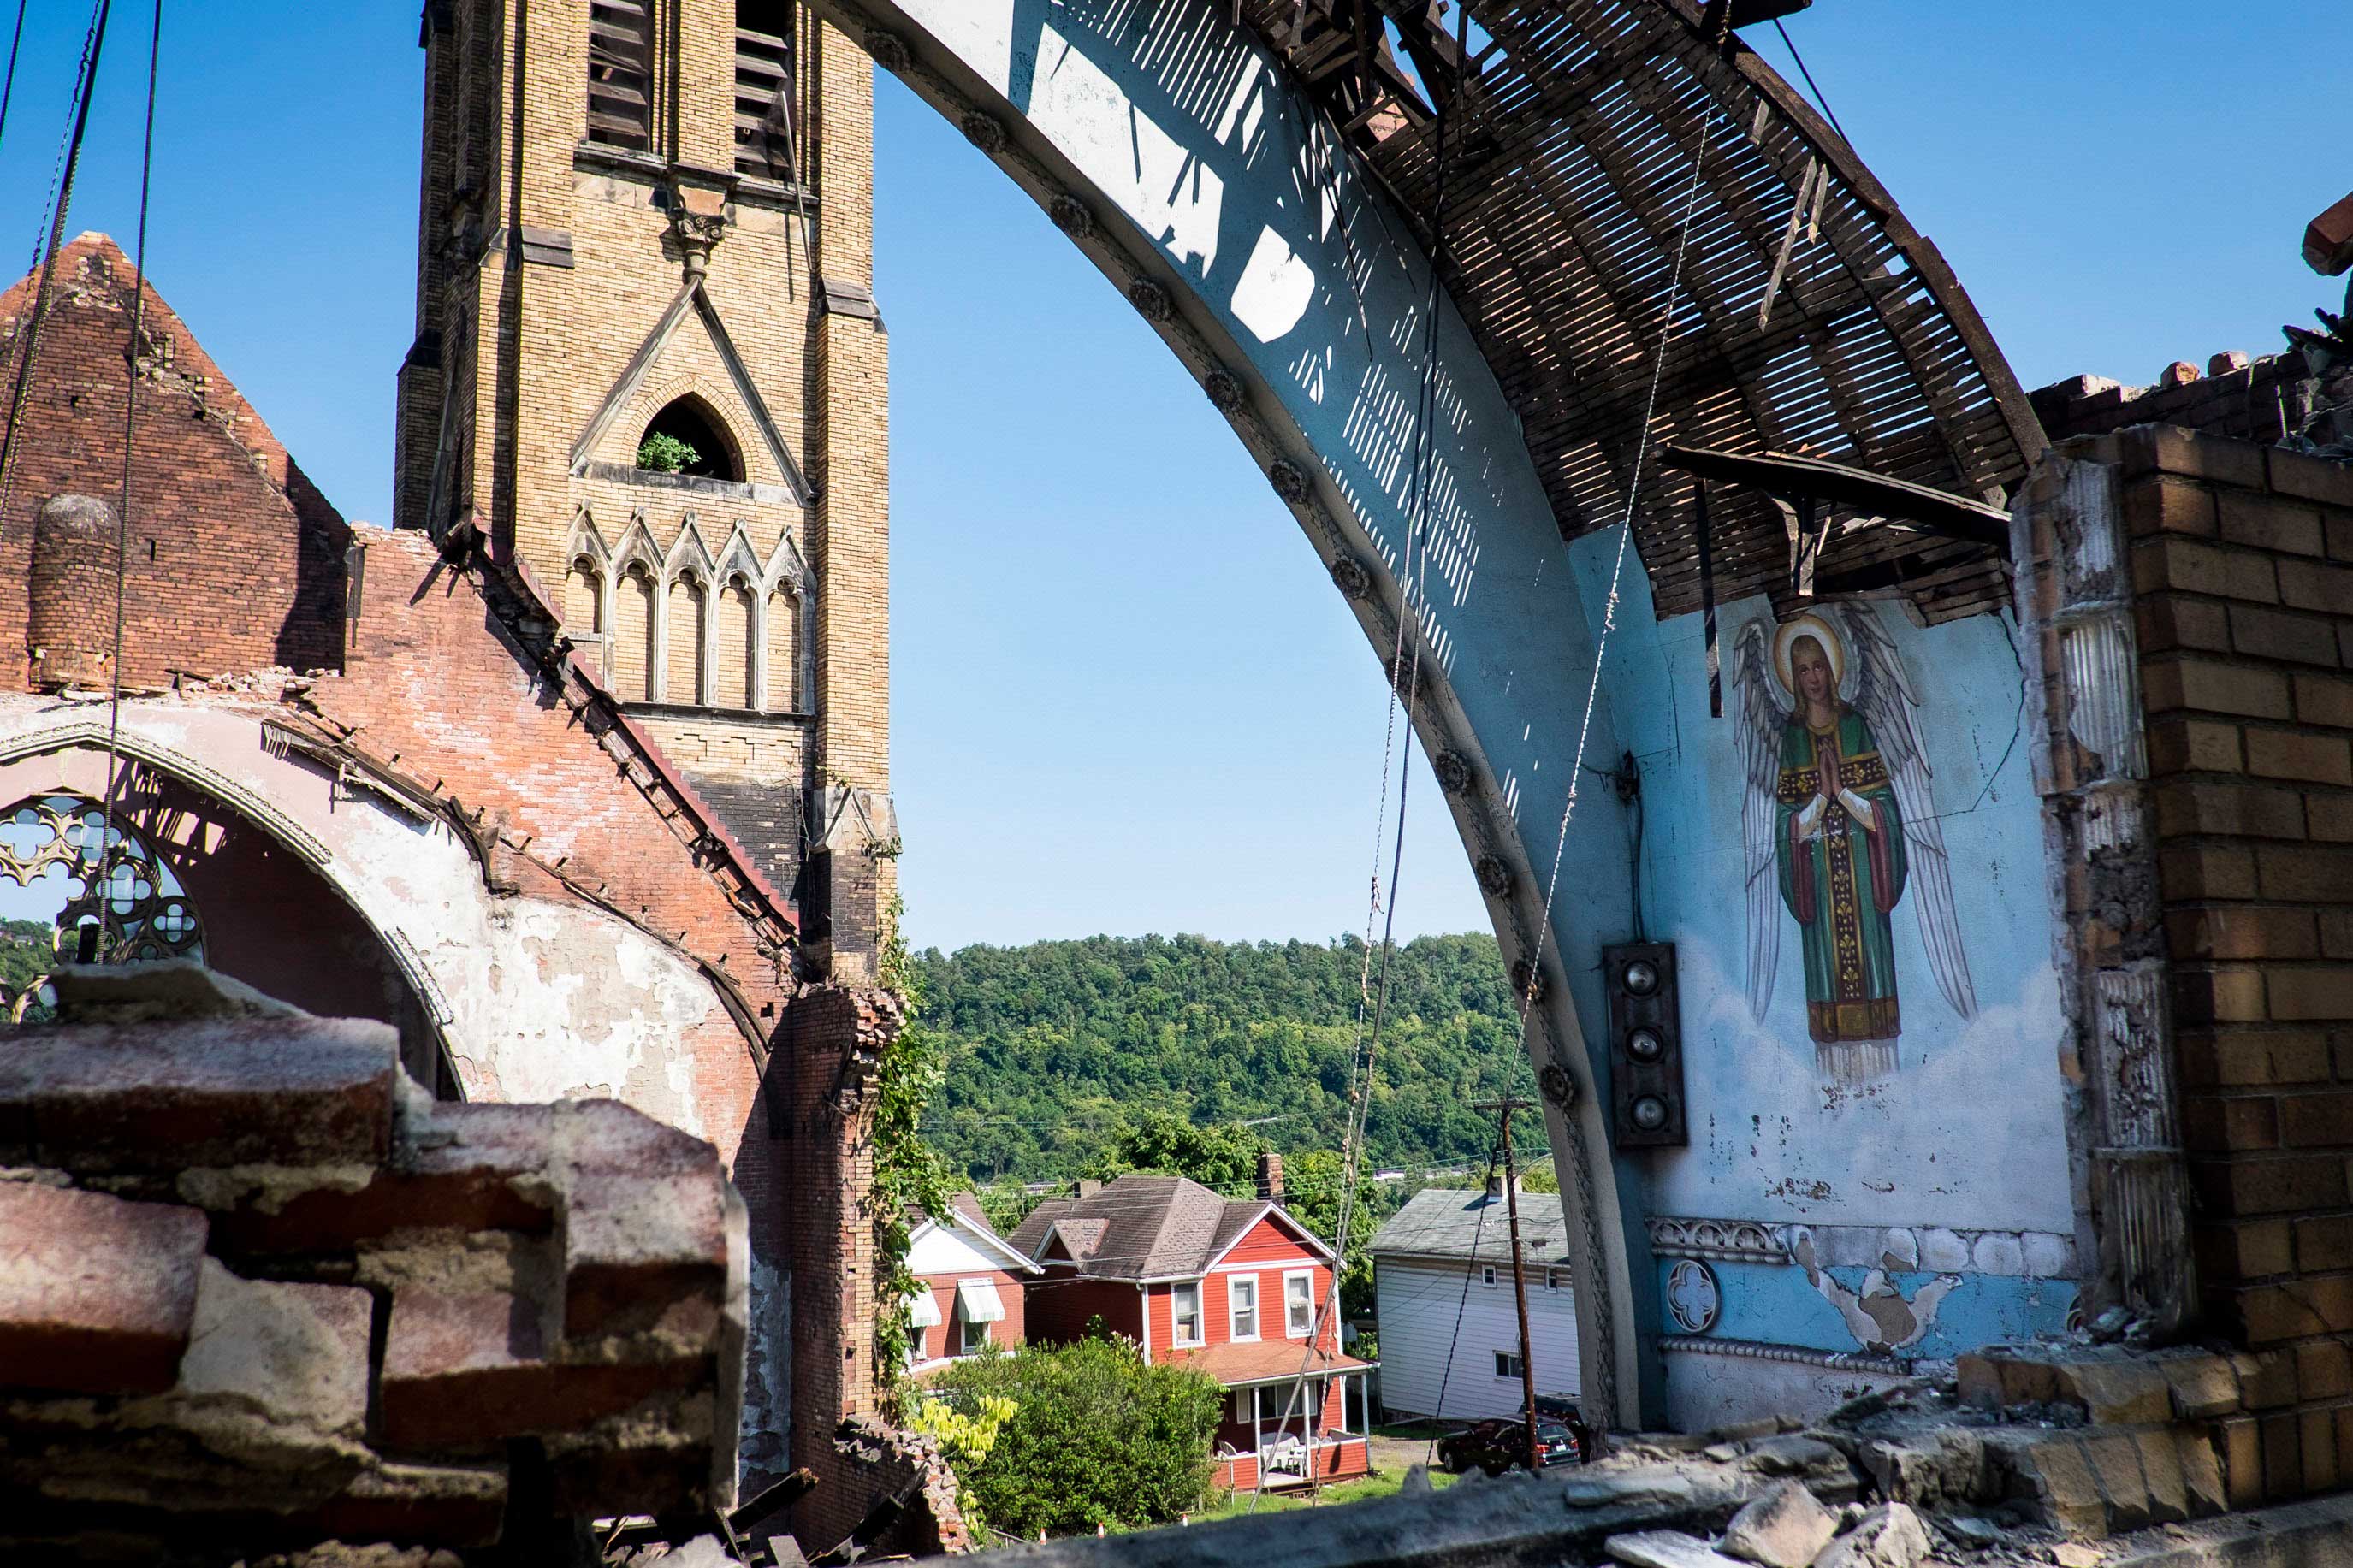 Holy Trinity Church in Duquesne being demolished after a storm caused the roof to collapse and make the rest of the structure unsafe.